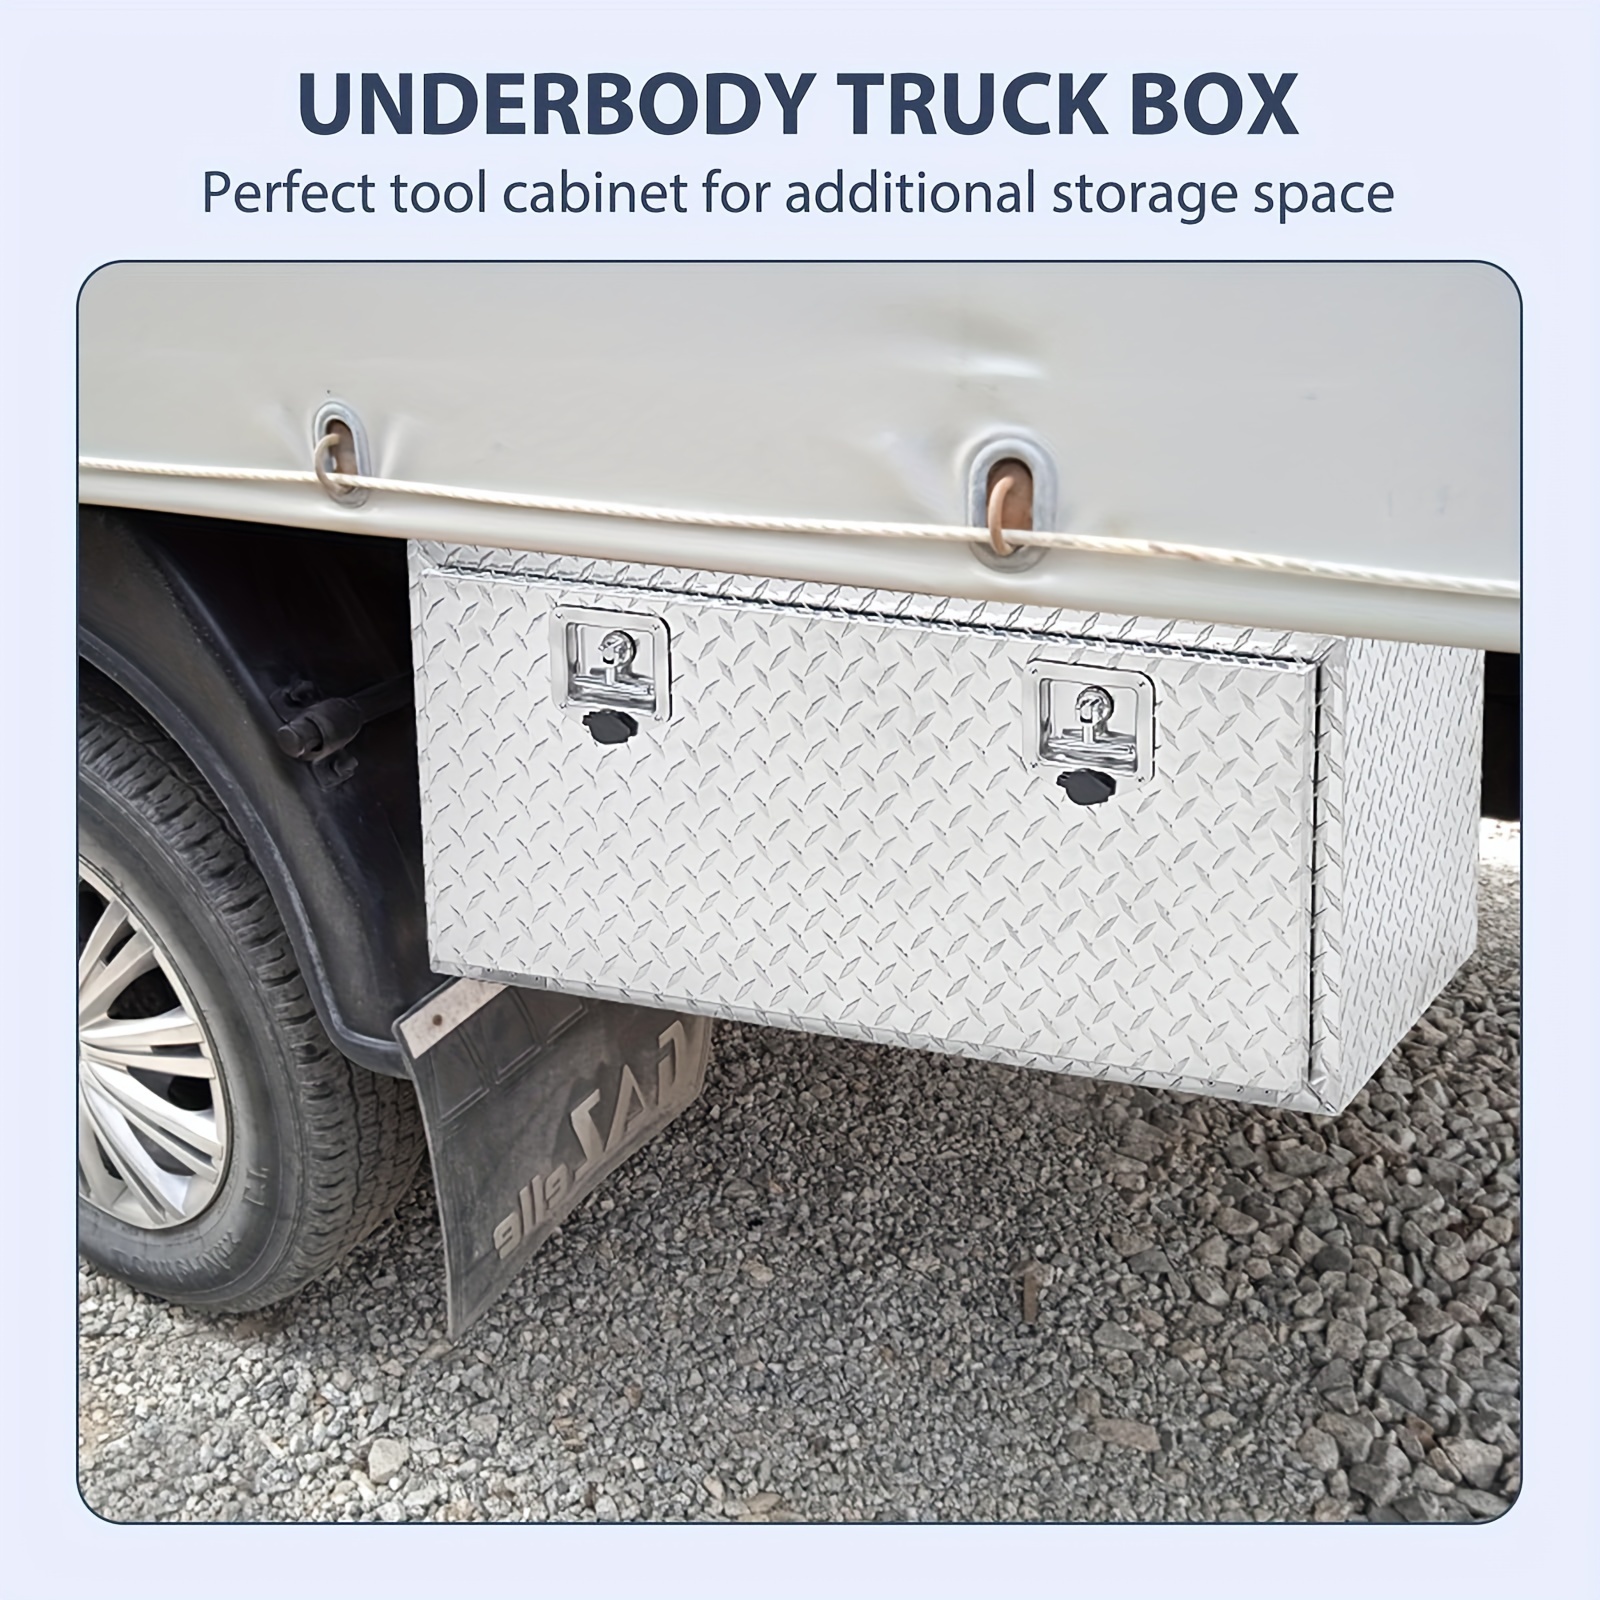 

Aluminum Underbody Truck Box 36 X 18 X 17 Inch With T-handle Latch, Waterproof Truck Storage Organizer Chest For Pick Up, Rv Trailer, Durable Truck Side Tool Box With A Mesh Pocket, Silver